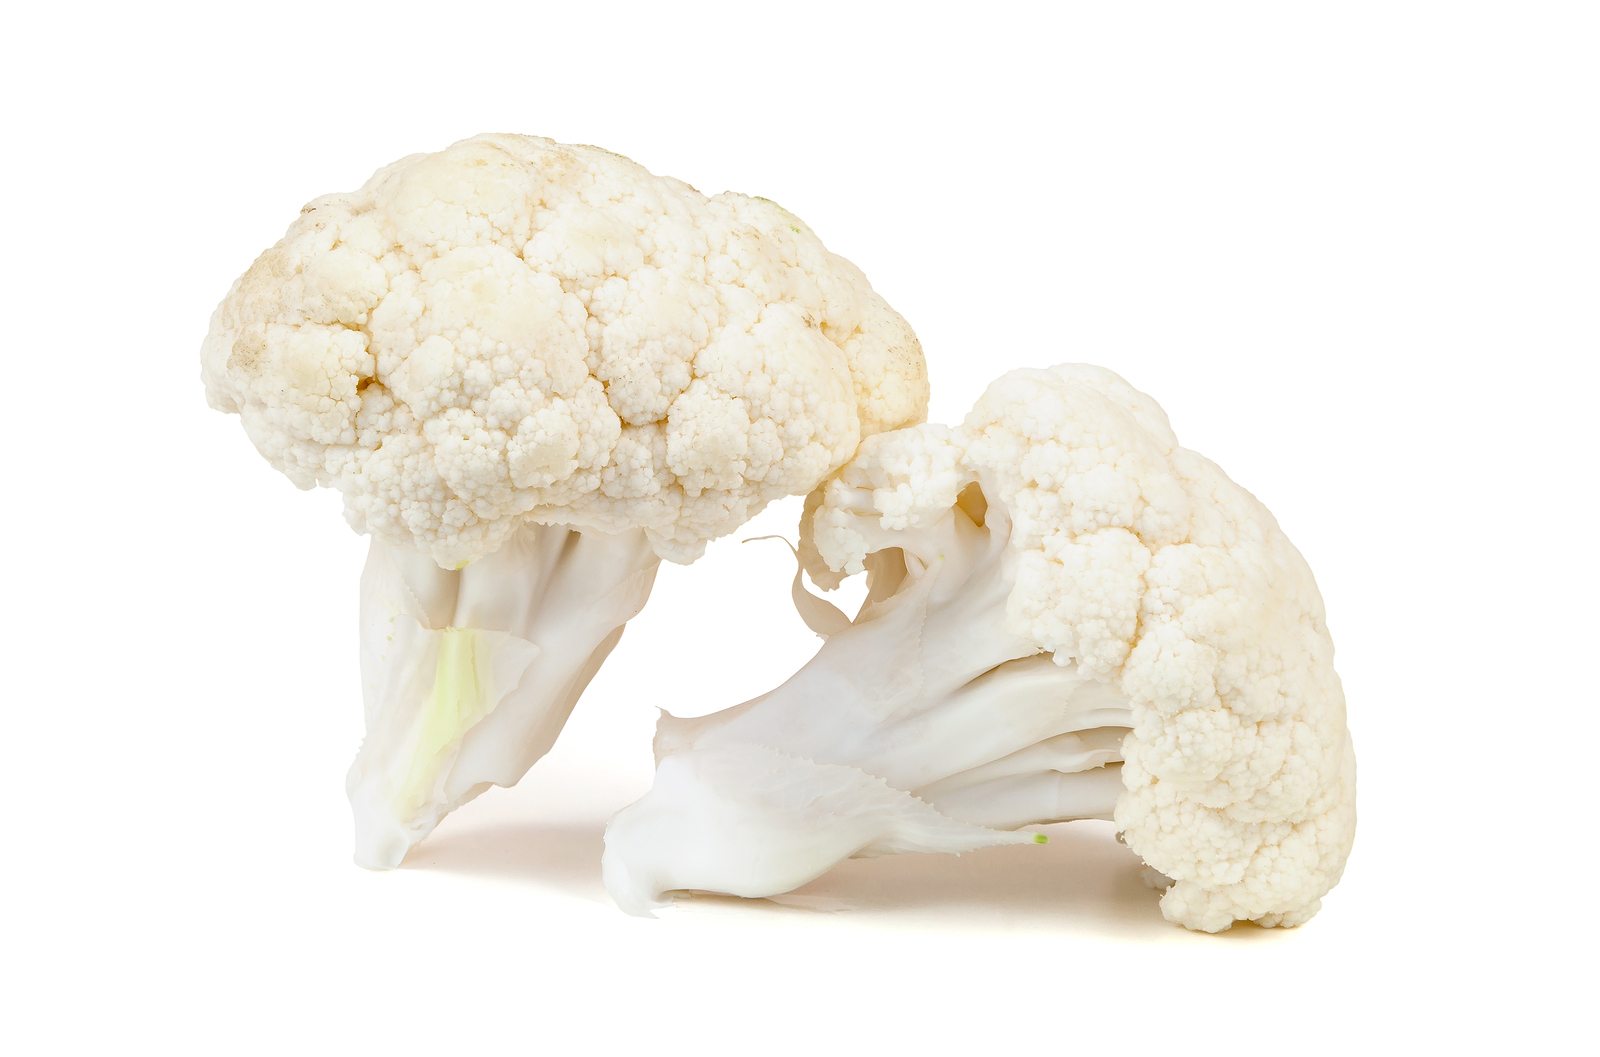 Part of cauliflower isolated on white background with clipping path